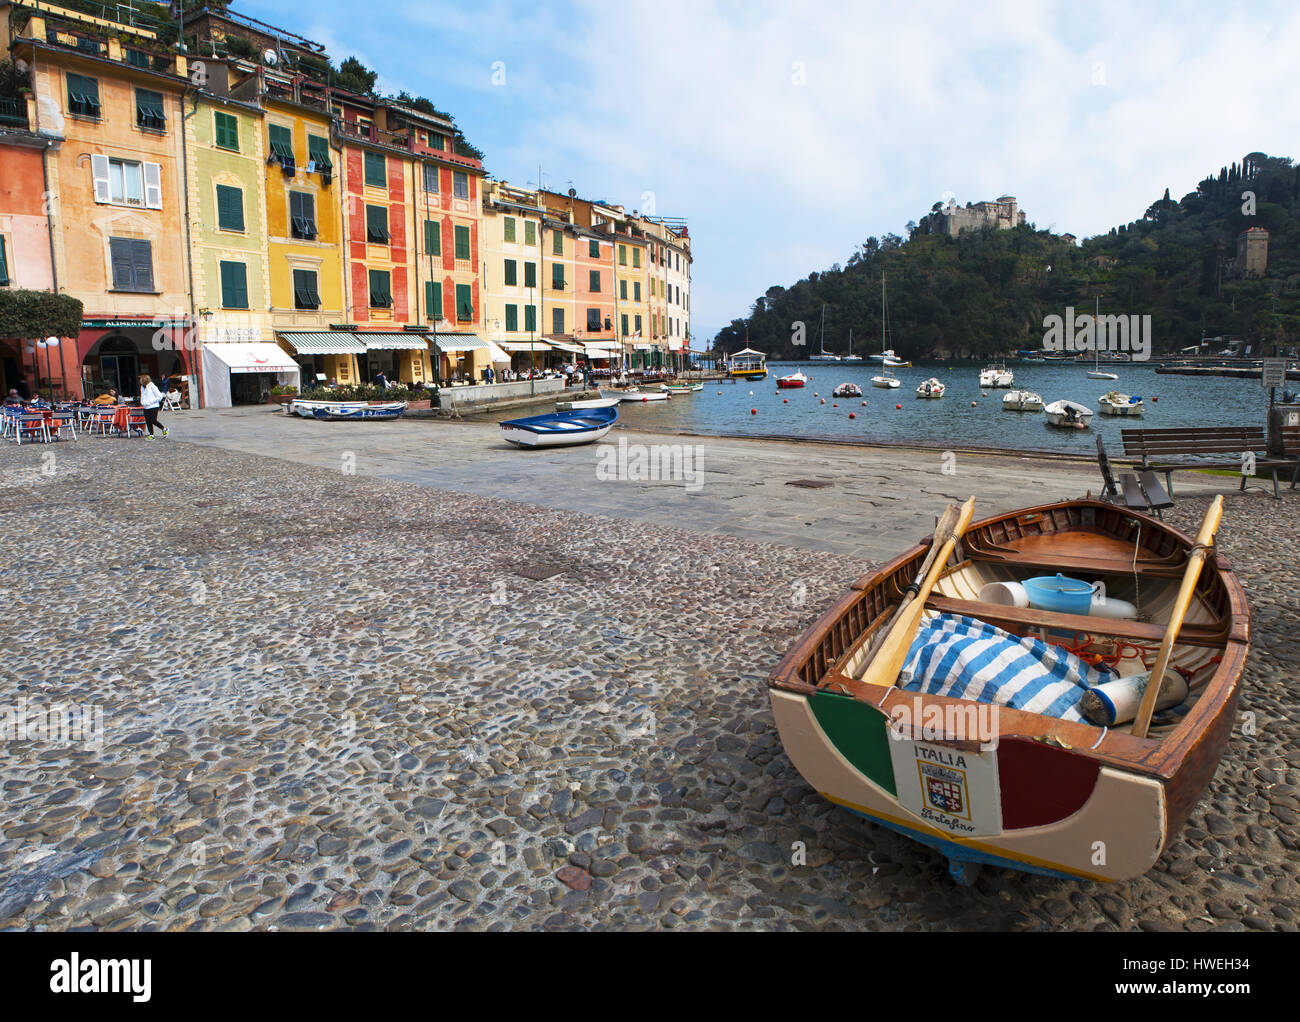 View of the Piazzetta, the little square of Portofino, an Italian fishing village famous for its picturesque harbour and the colorful houses Stock Photo